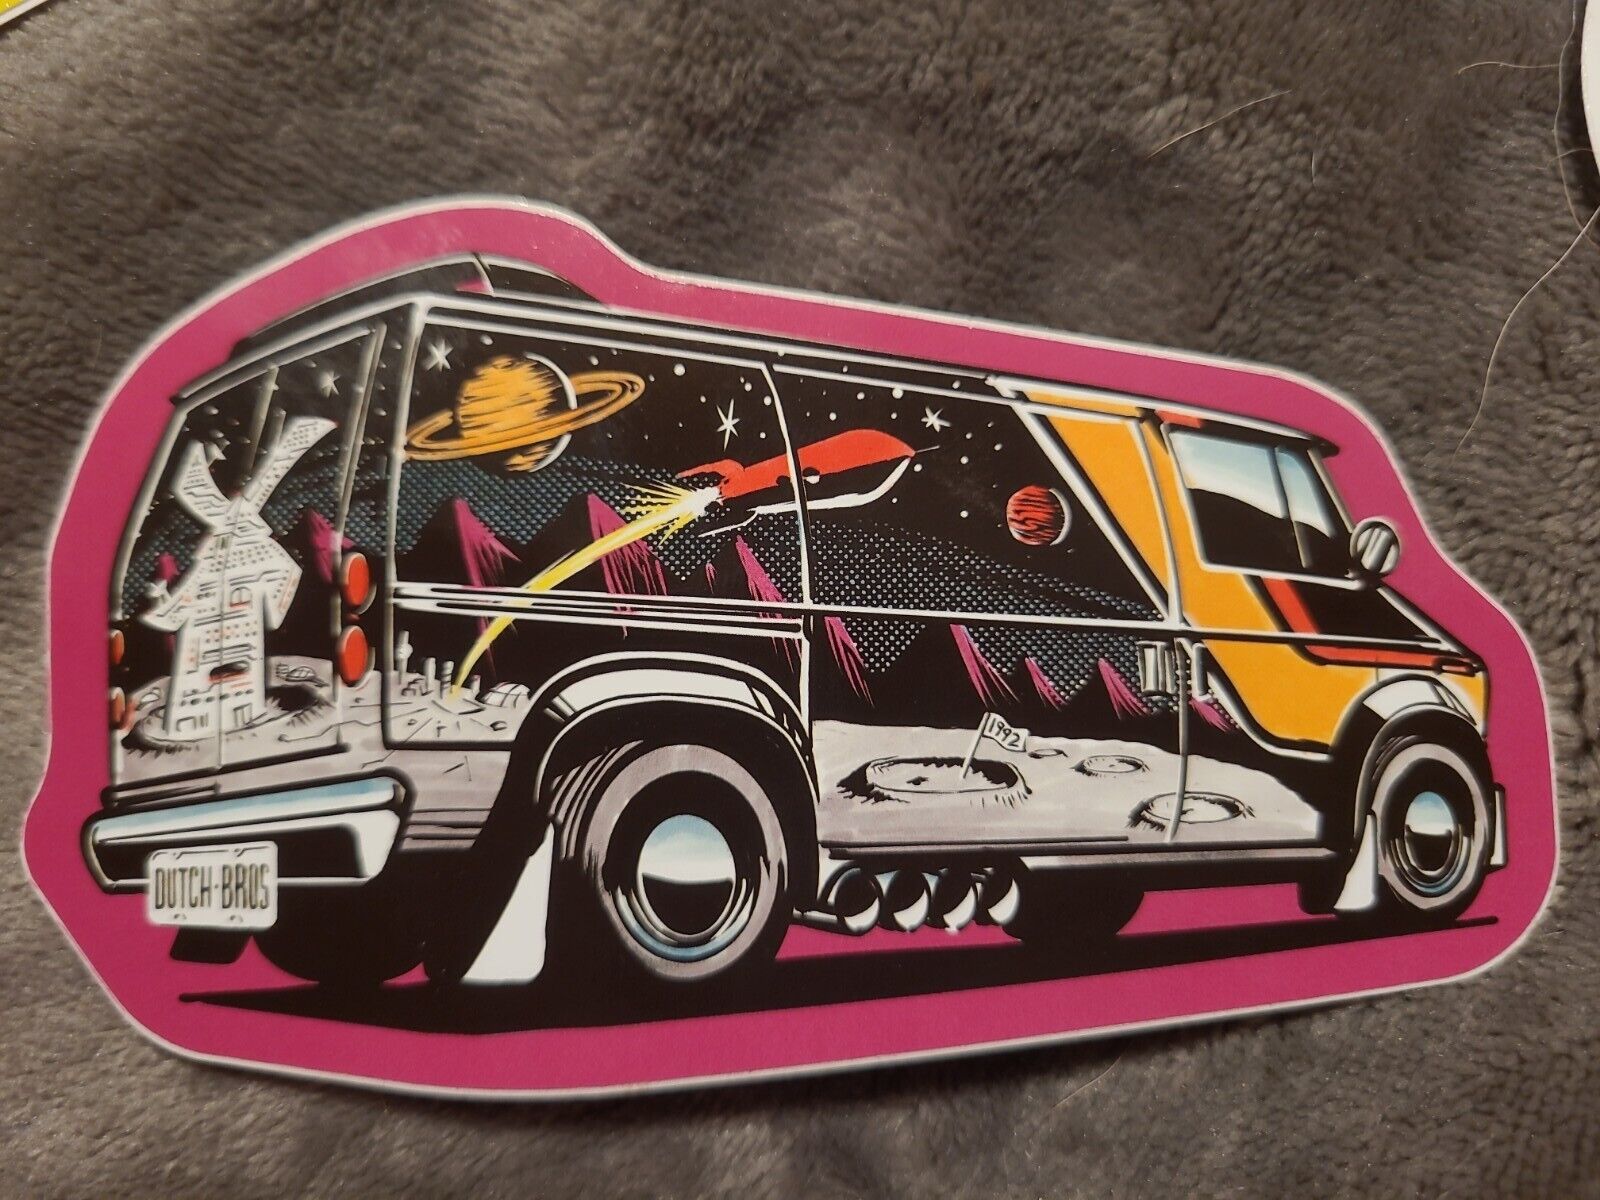 Dutch Bros Sticker SEPTEMBER 2022 Van with Space theme, Windmill, Planets